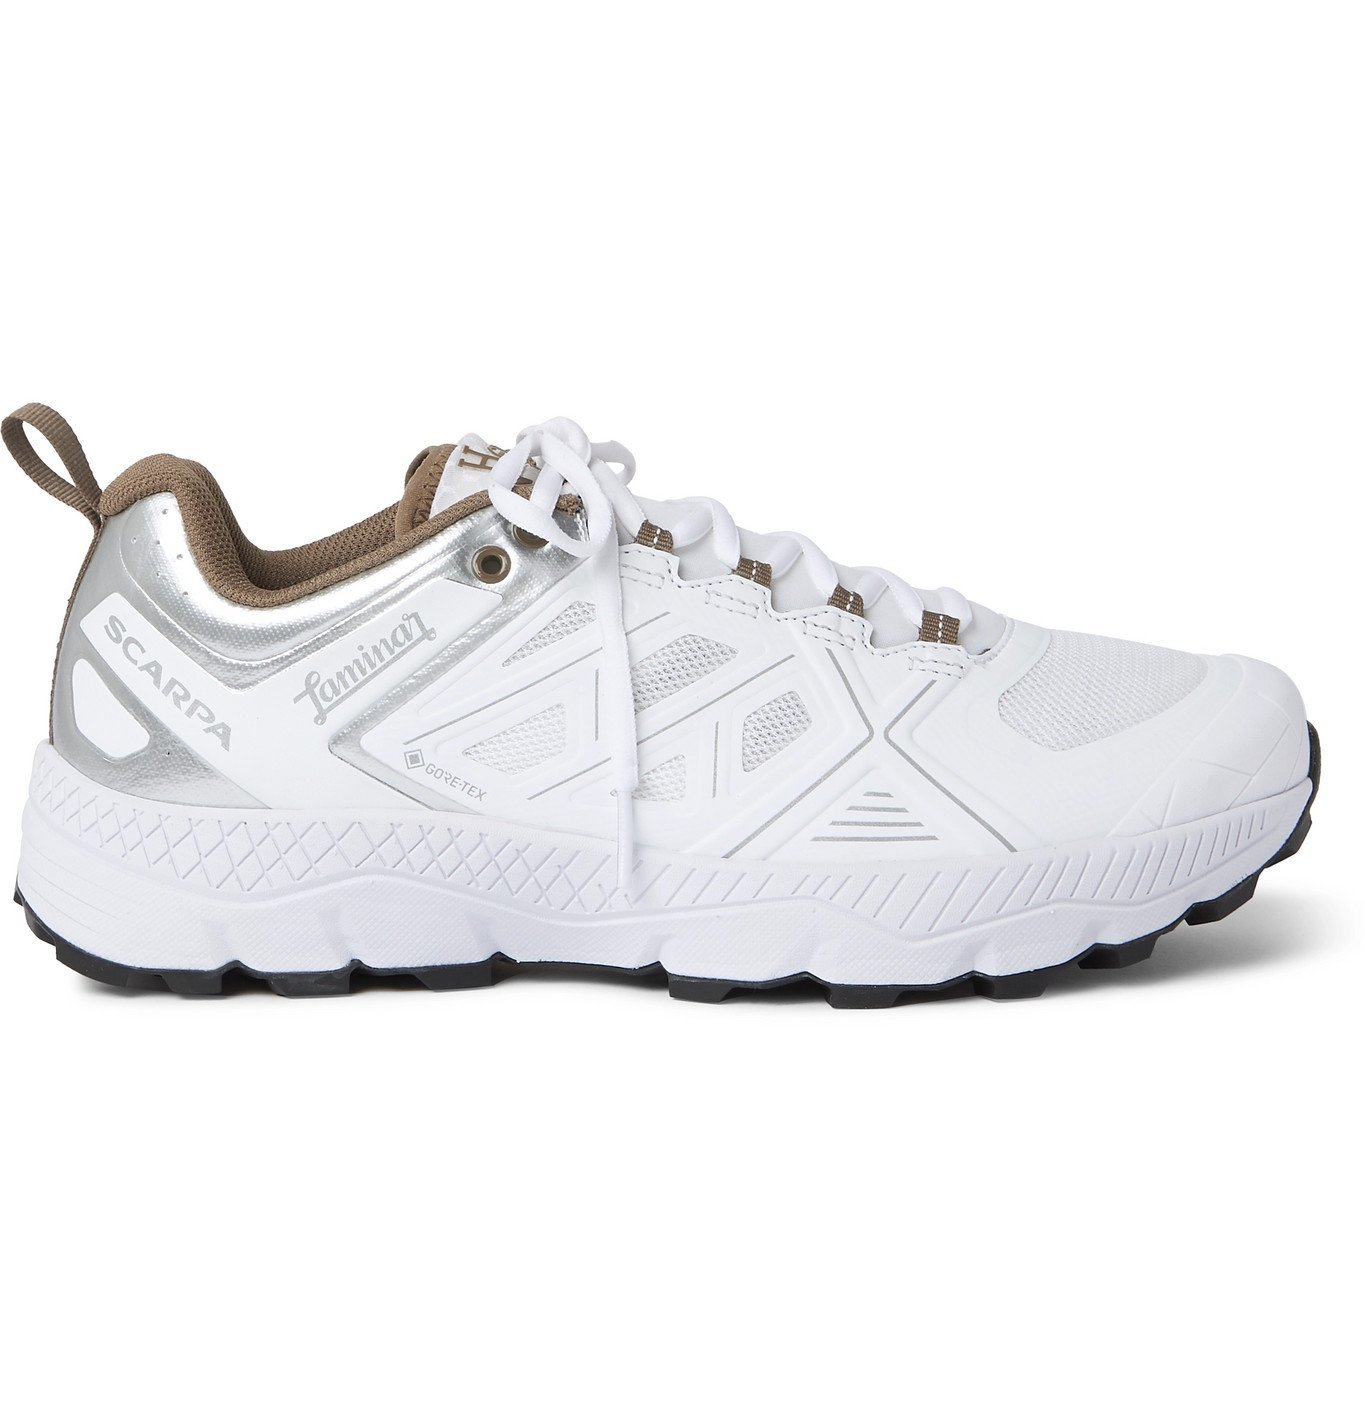 Herno Laminar - Scarpa Rubber-Trimmed Mesh Running Sneakers - White Herno